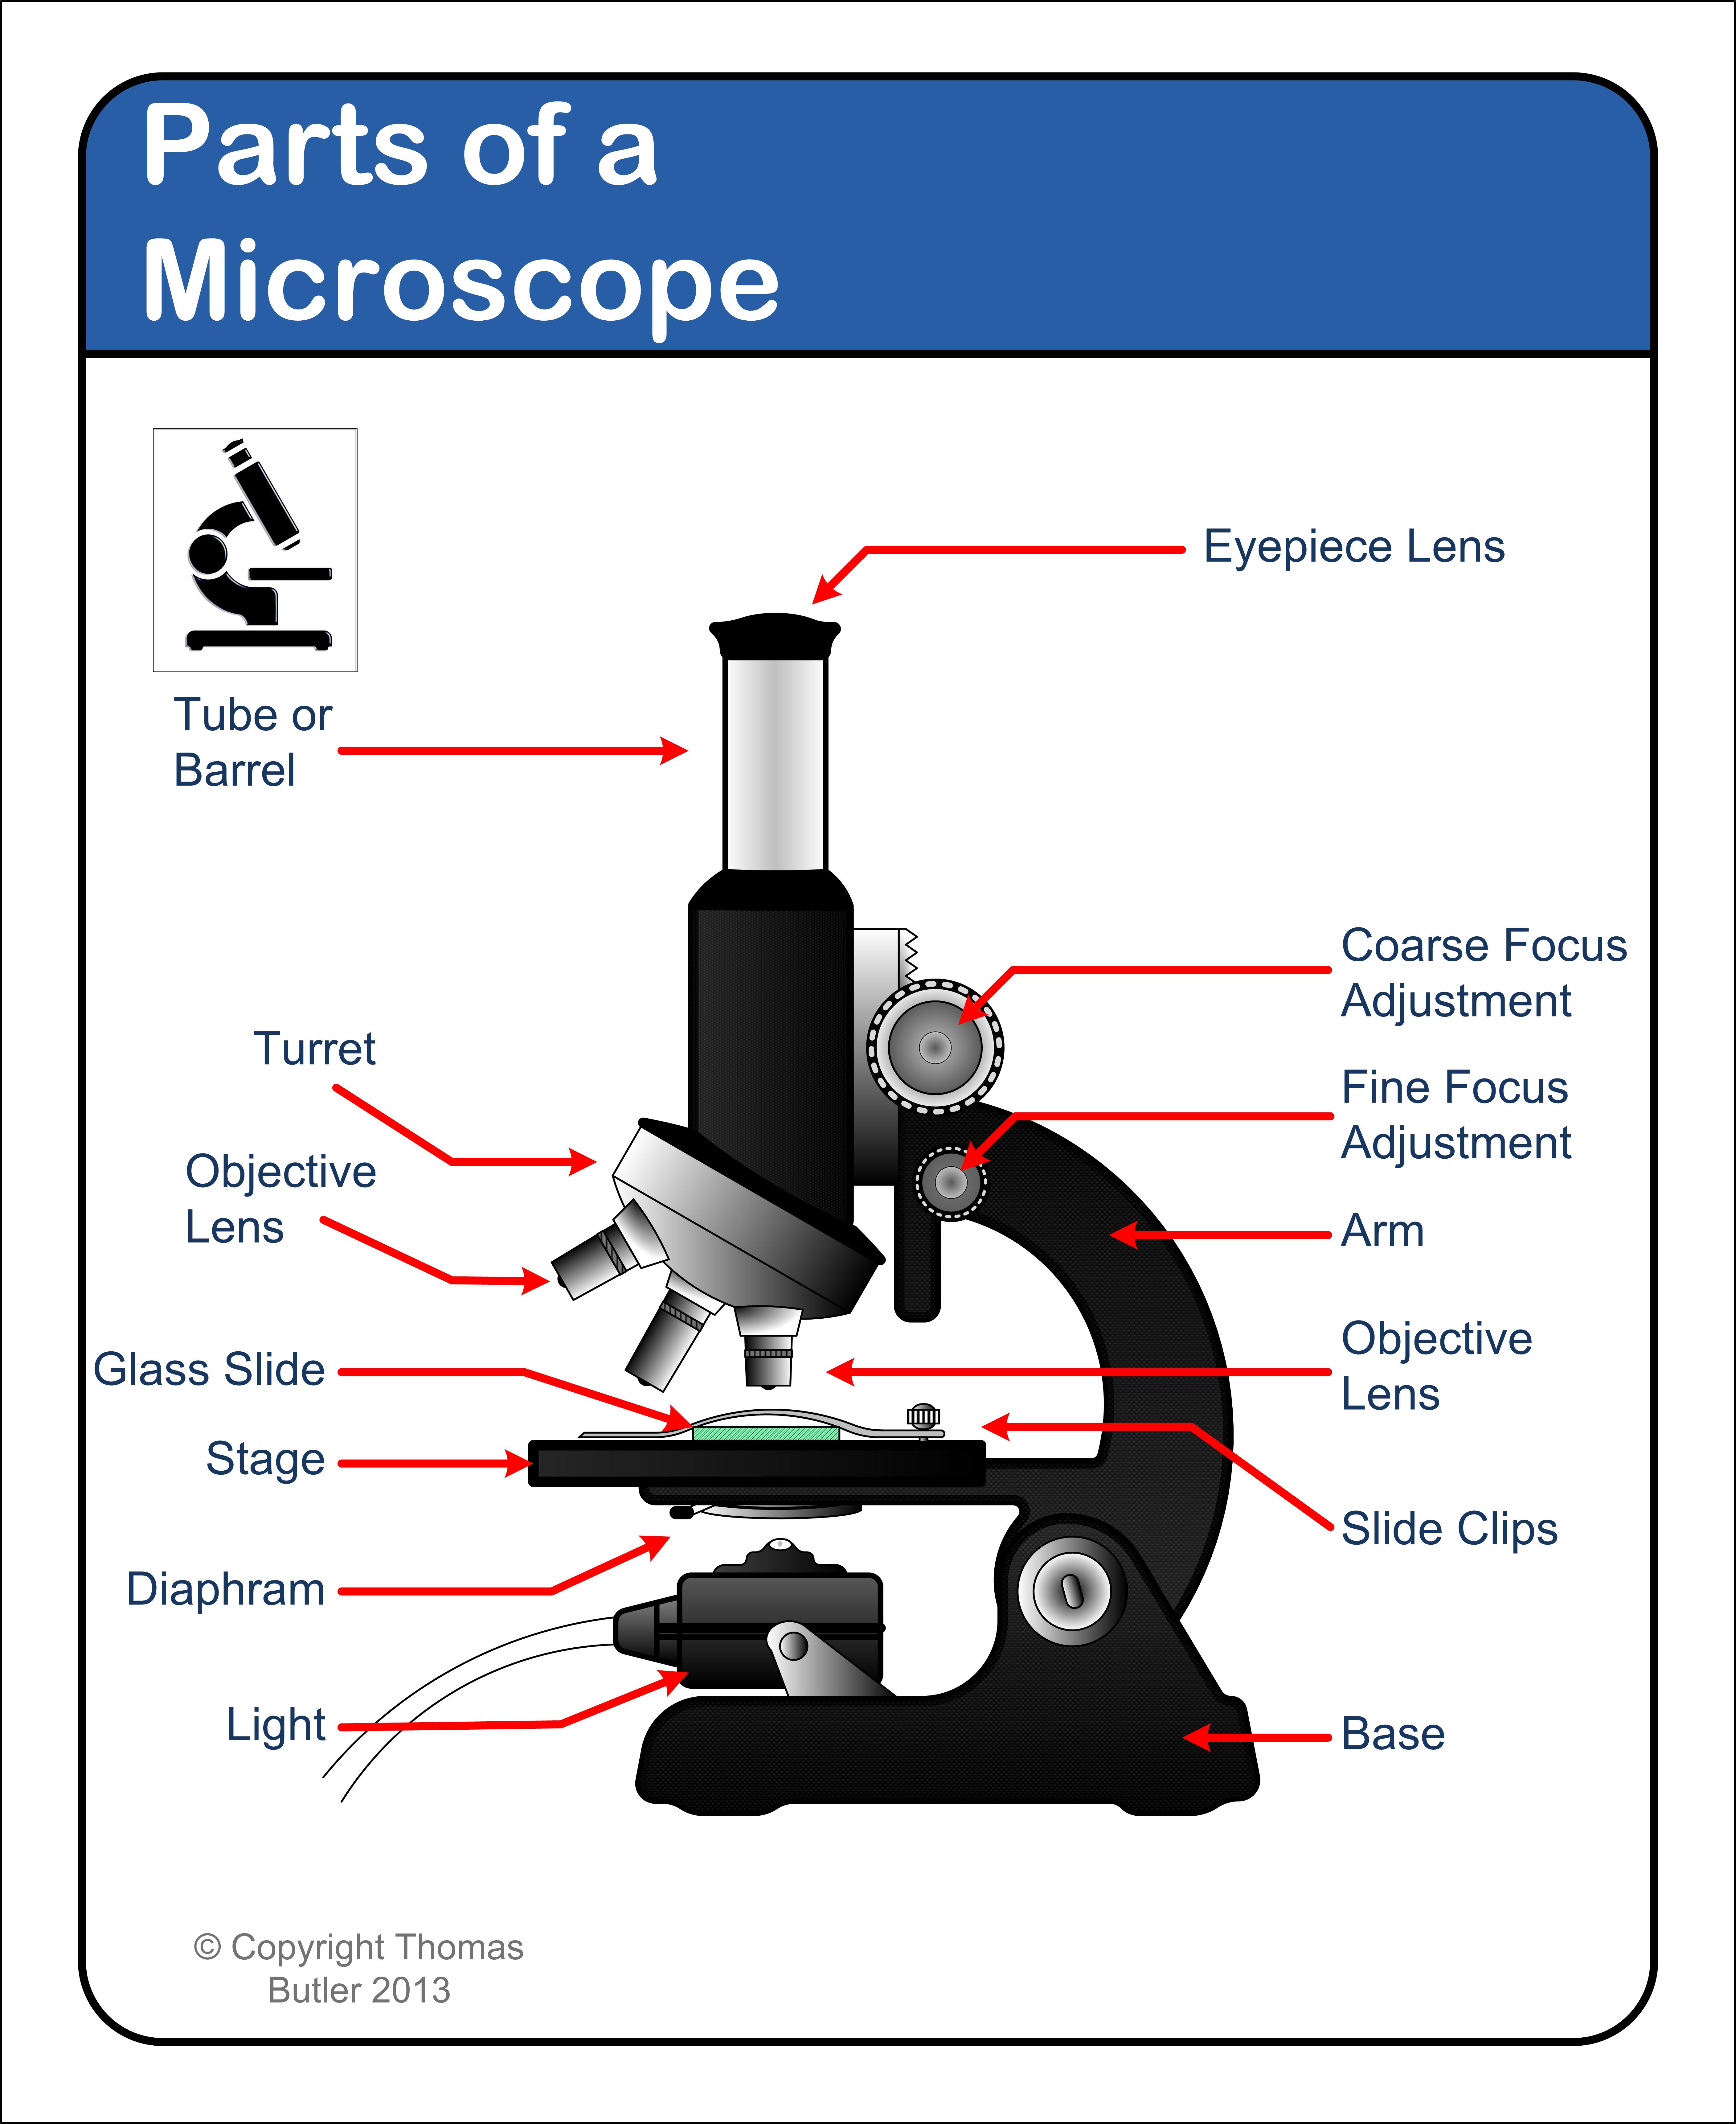 30 Microscope Label And Functions - Label Design Ideas 2020